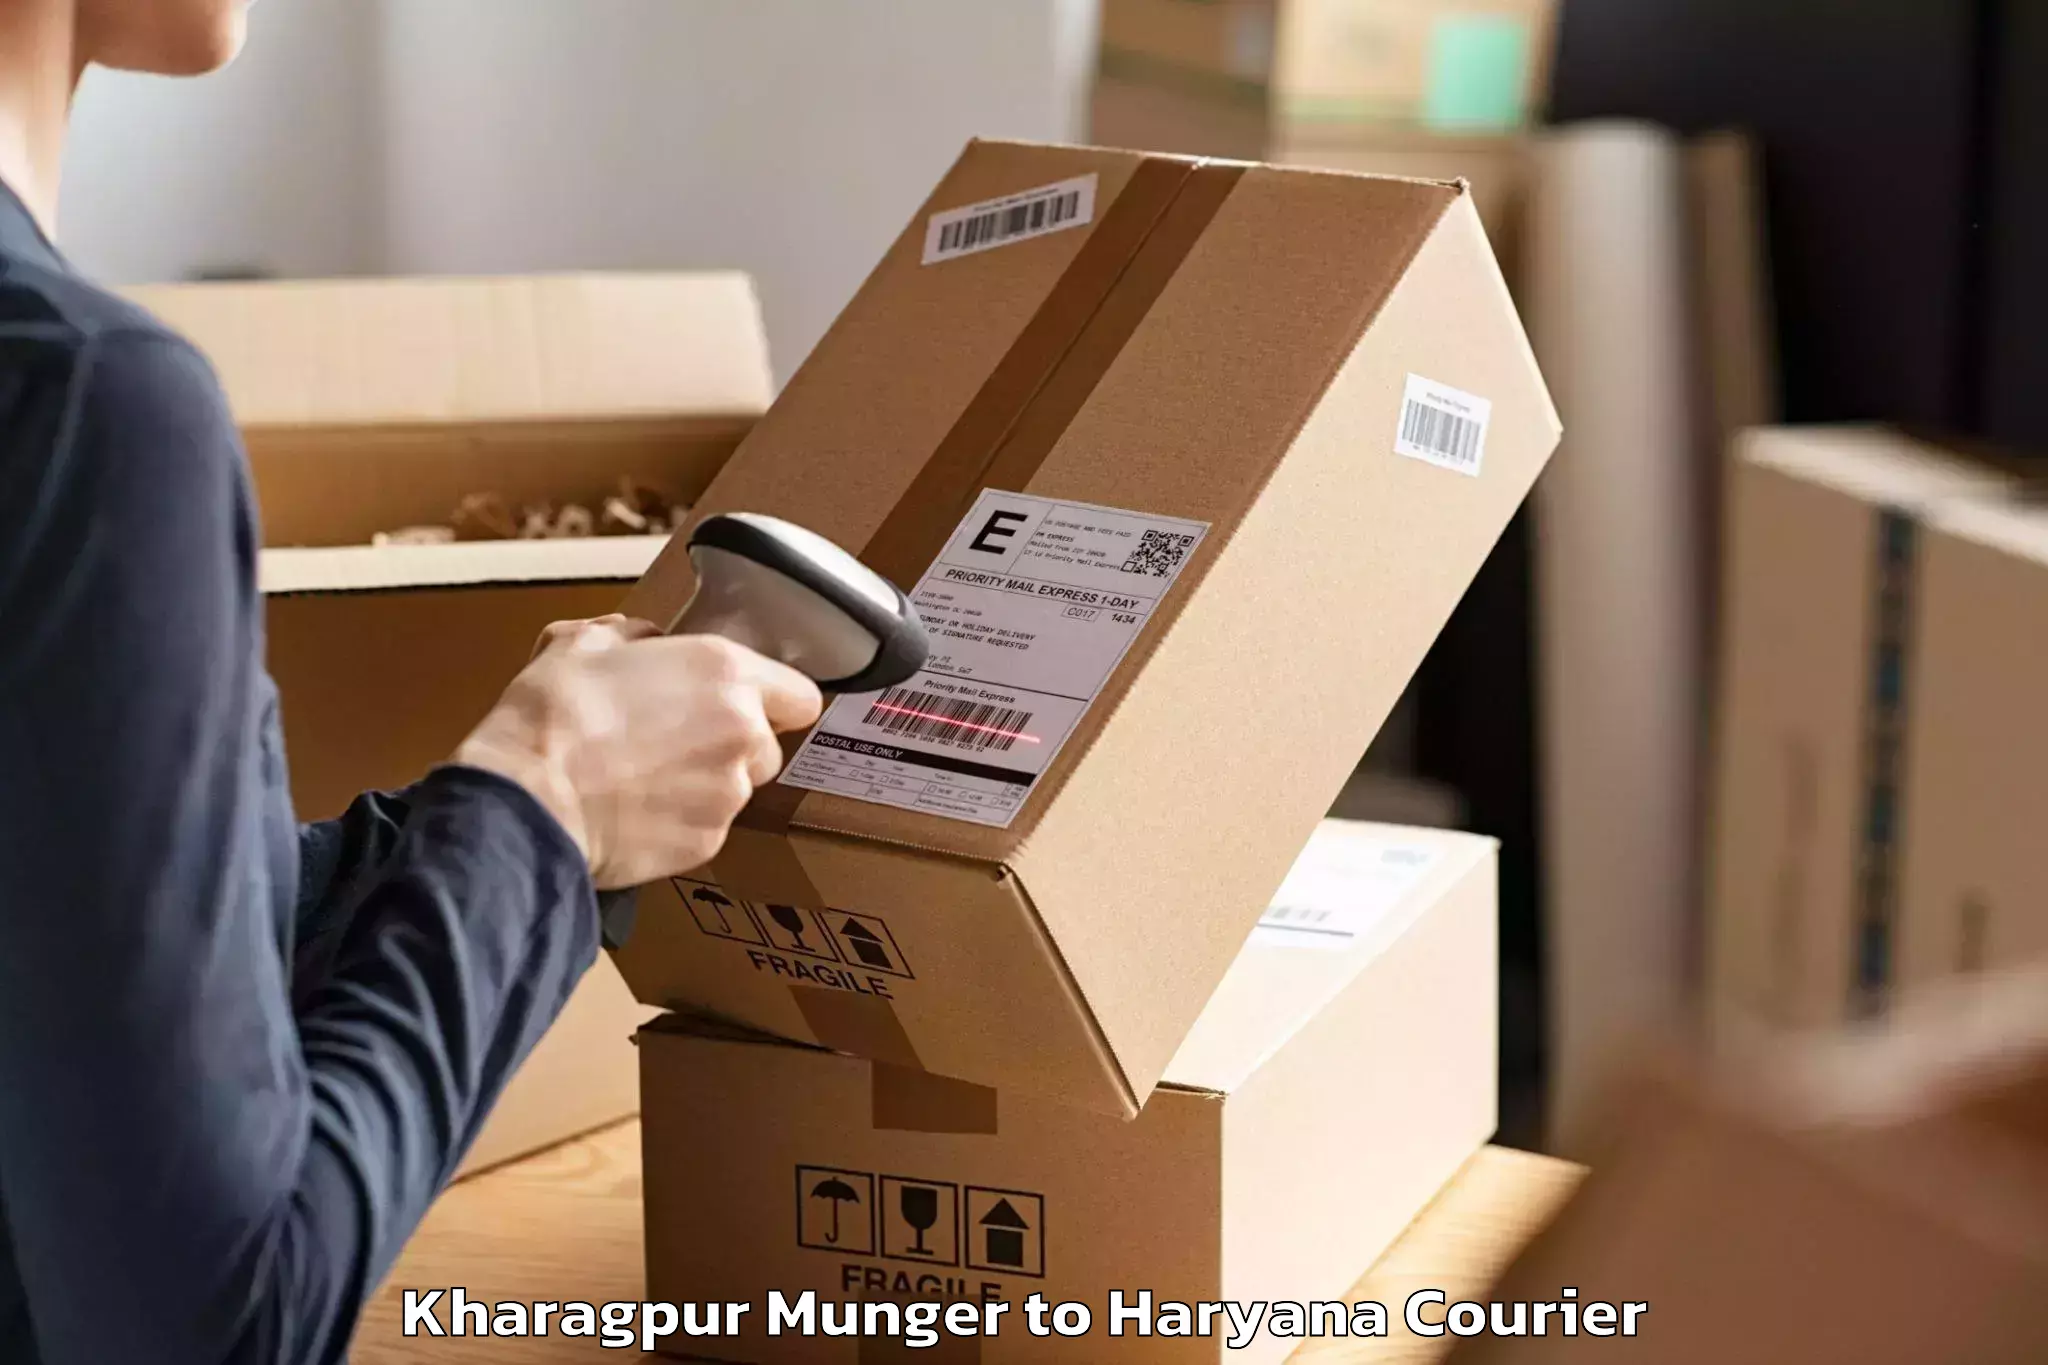 Furniture movers and packers Kharagpur Munger to Dharuhera